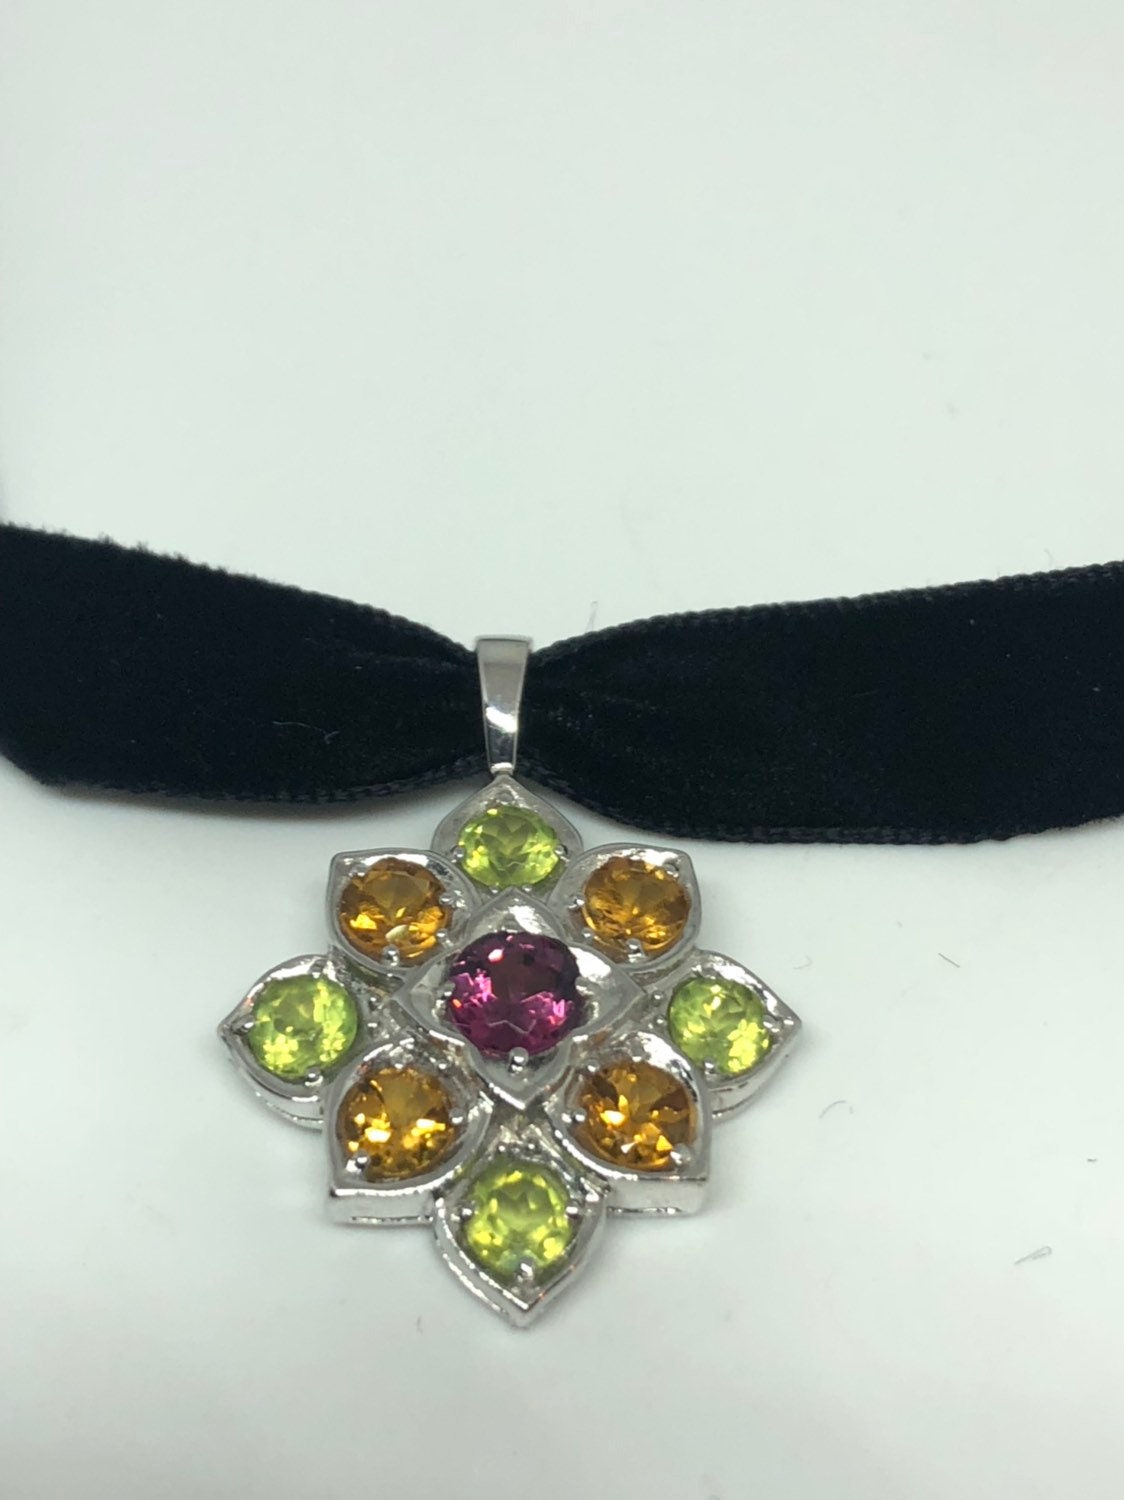 Vintage Handmade 925 Sterling Silver Genuine Citrine Peridot and tourmaline Antique Pendant Necklace